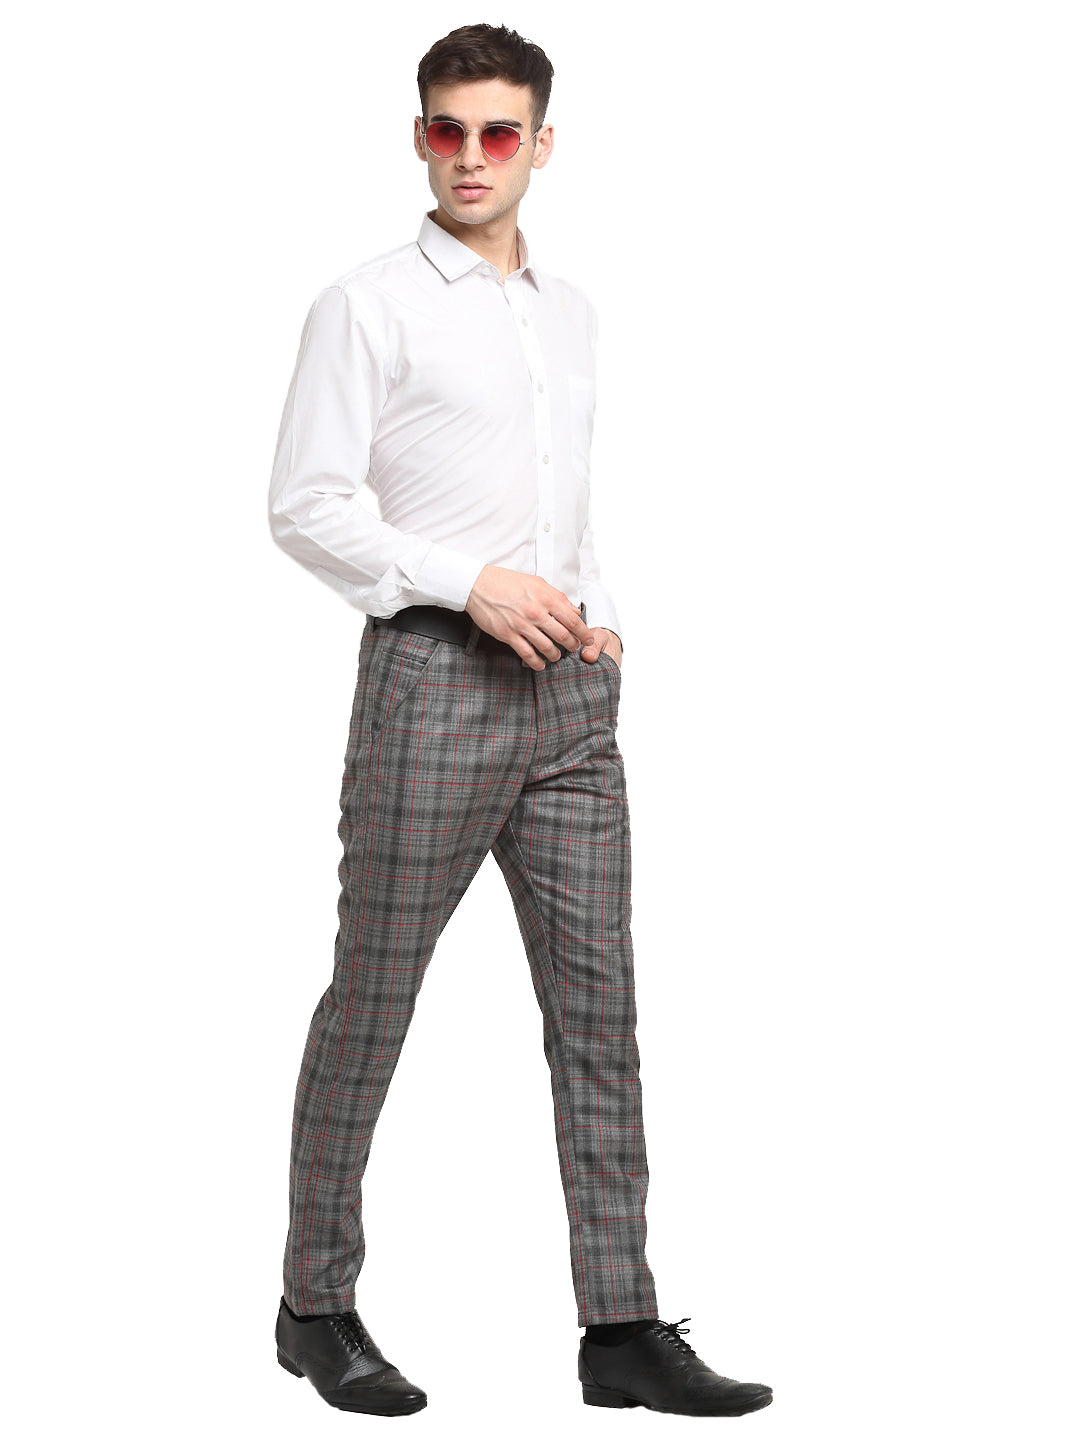 Premium Plaid Slim Fit Pants For Mens Formal Weddings Fashionable And  Casual Straight Dress Plaid Trousers Men From Bearlittle, $25.9 | DHgate.Com